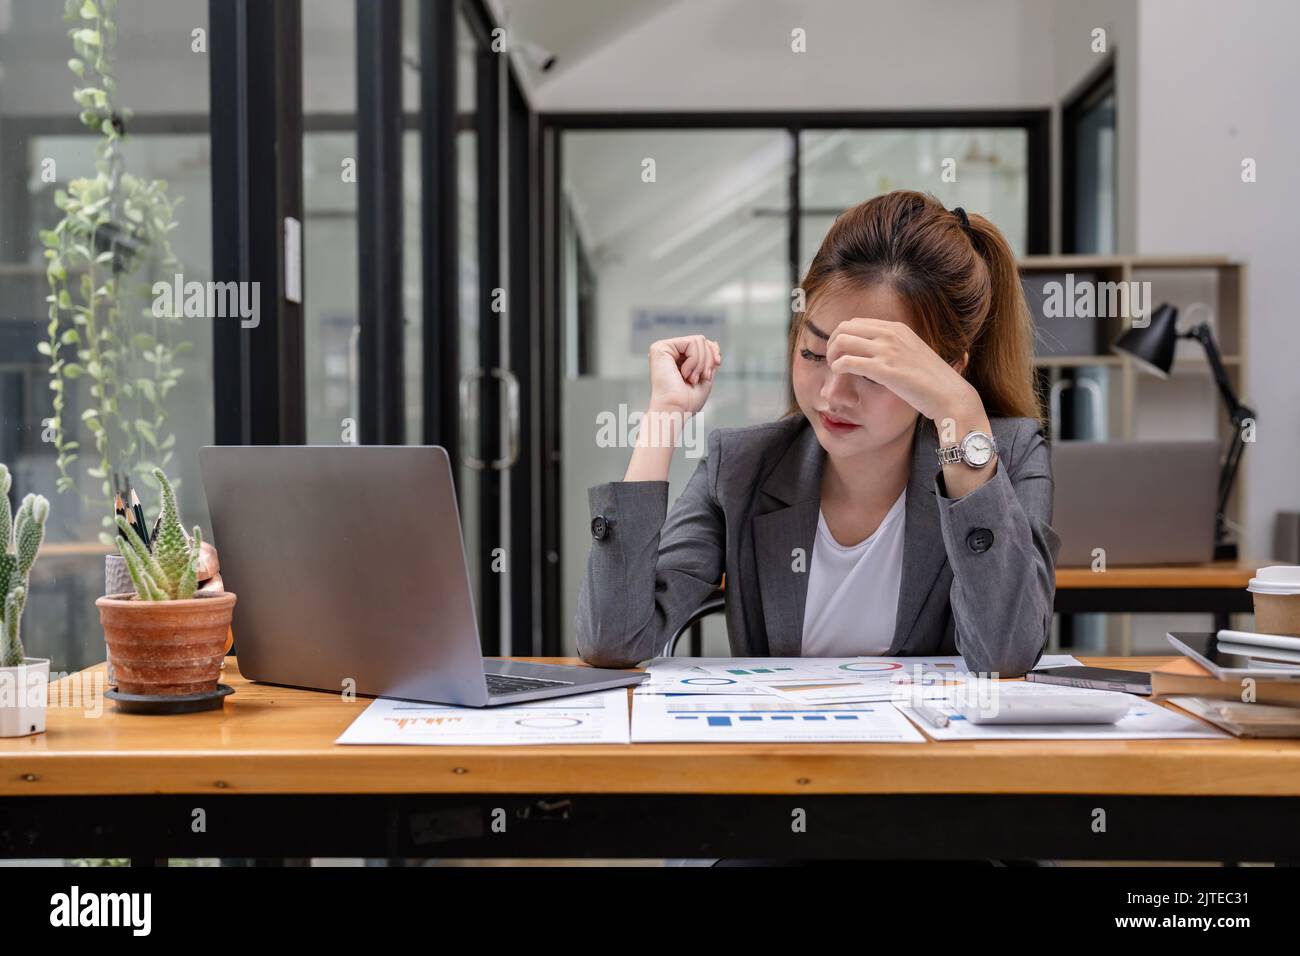 Stressed business woman working from home on laptop looking worried, tired and overwhelmed. Stock Photo